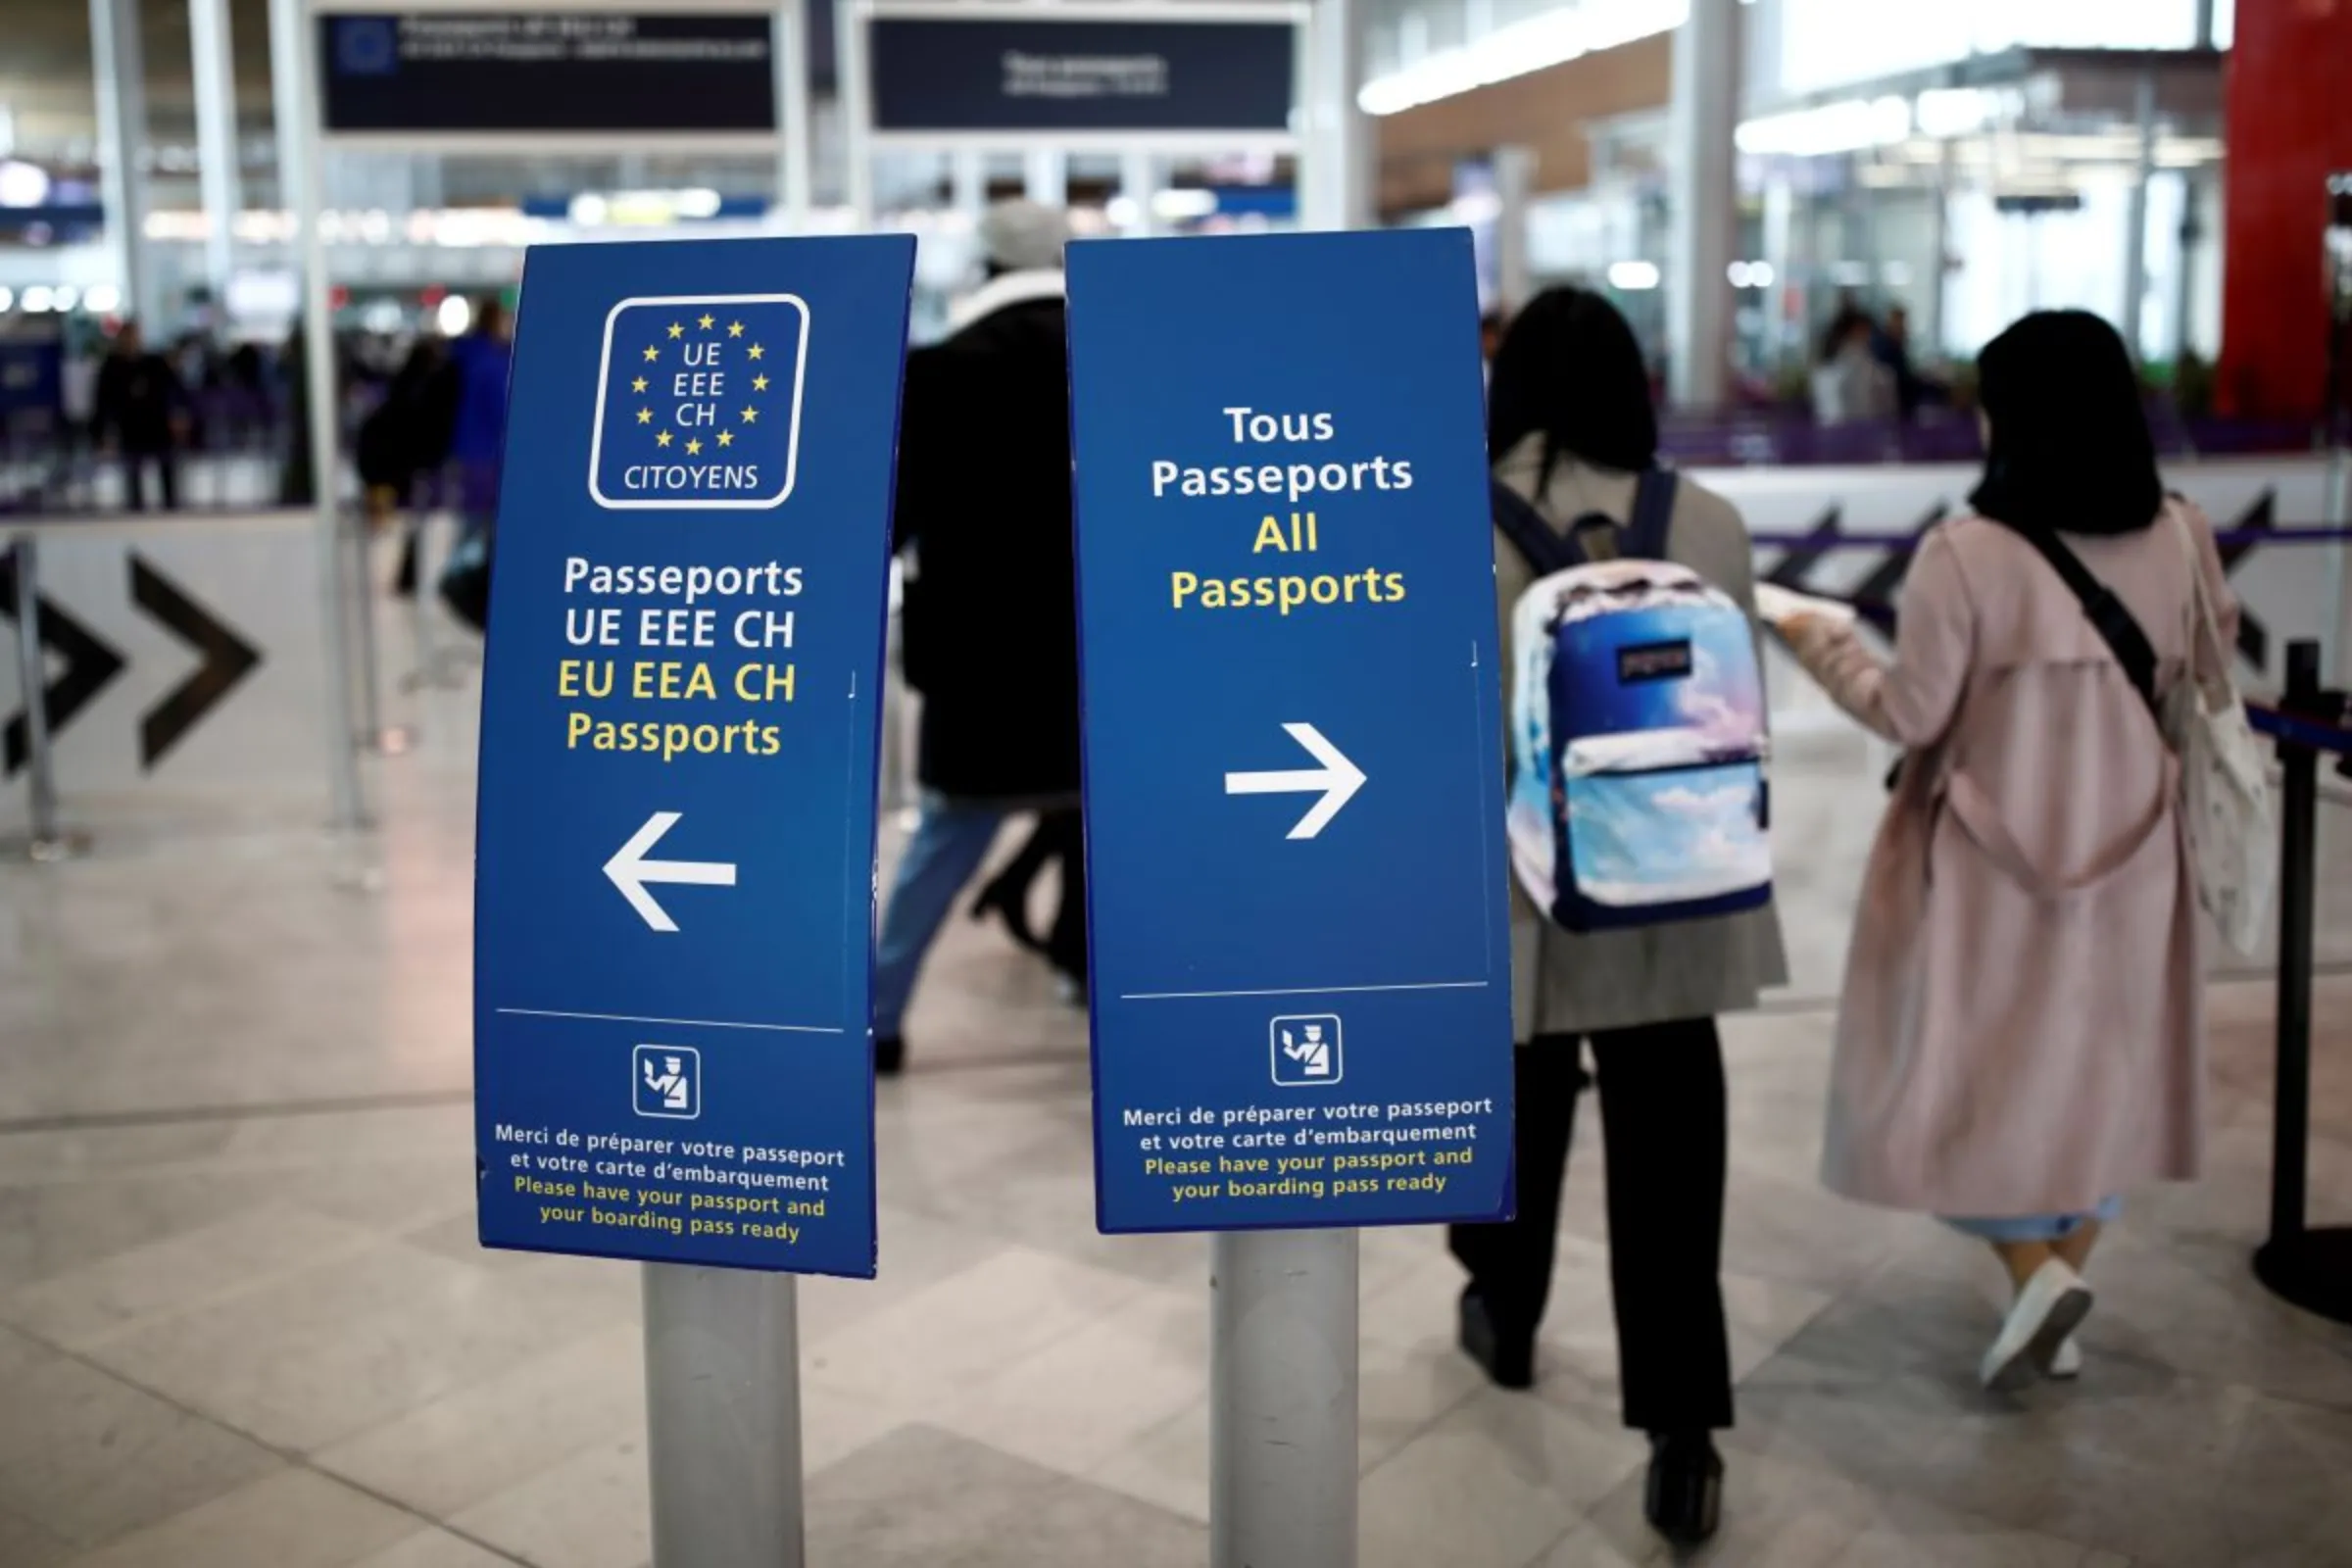 Directional signs for passport control are seen at Charles de Gaulle airport, operated by Aeroports de Paris, in Roissy, France, April 11, 2019. REUTERS/Benoit Tessier